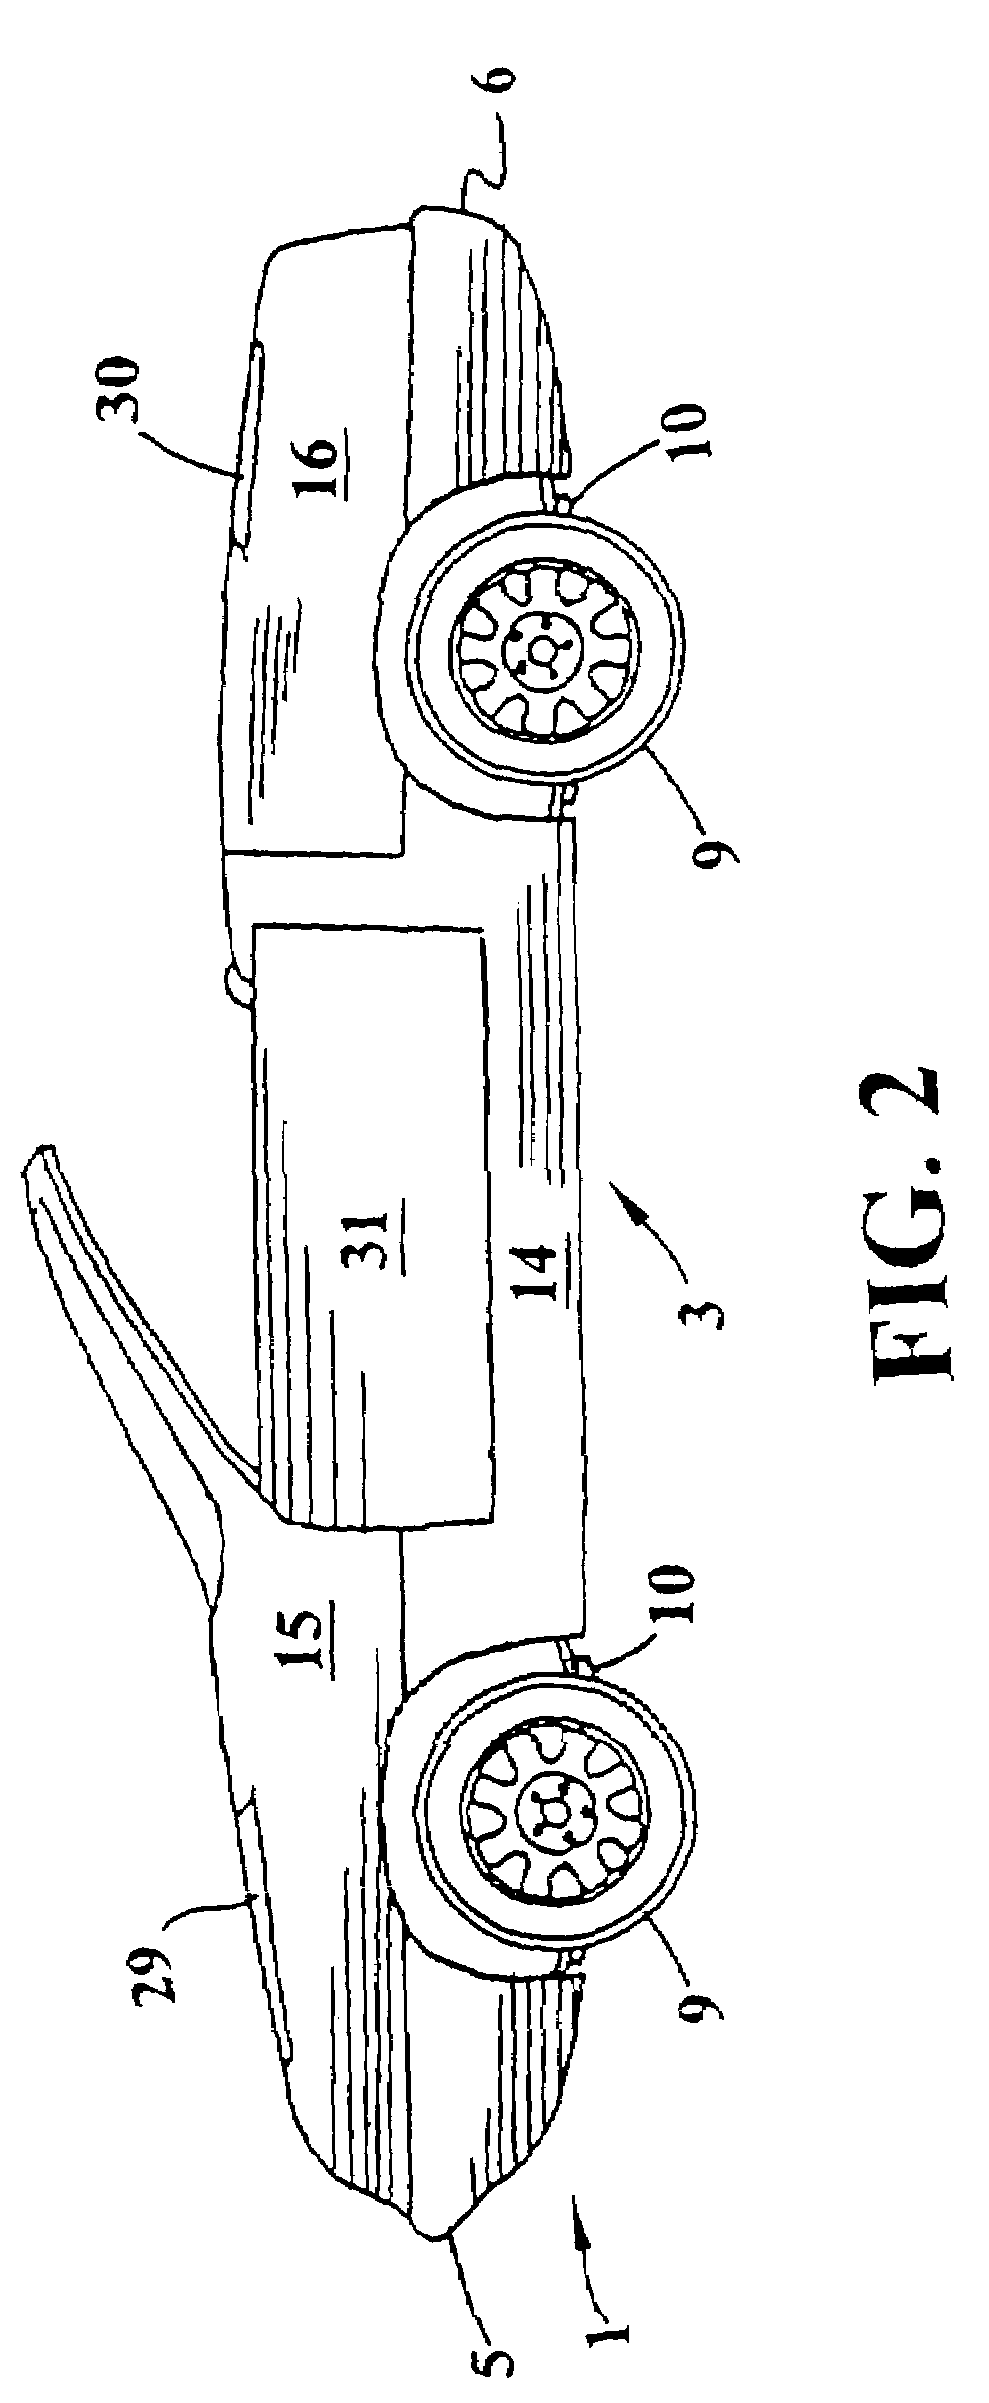 Automotive vehicle having a modular plastic body attached to a metal chassis